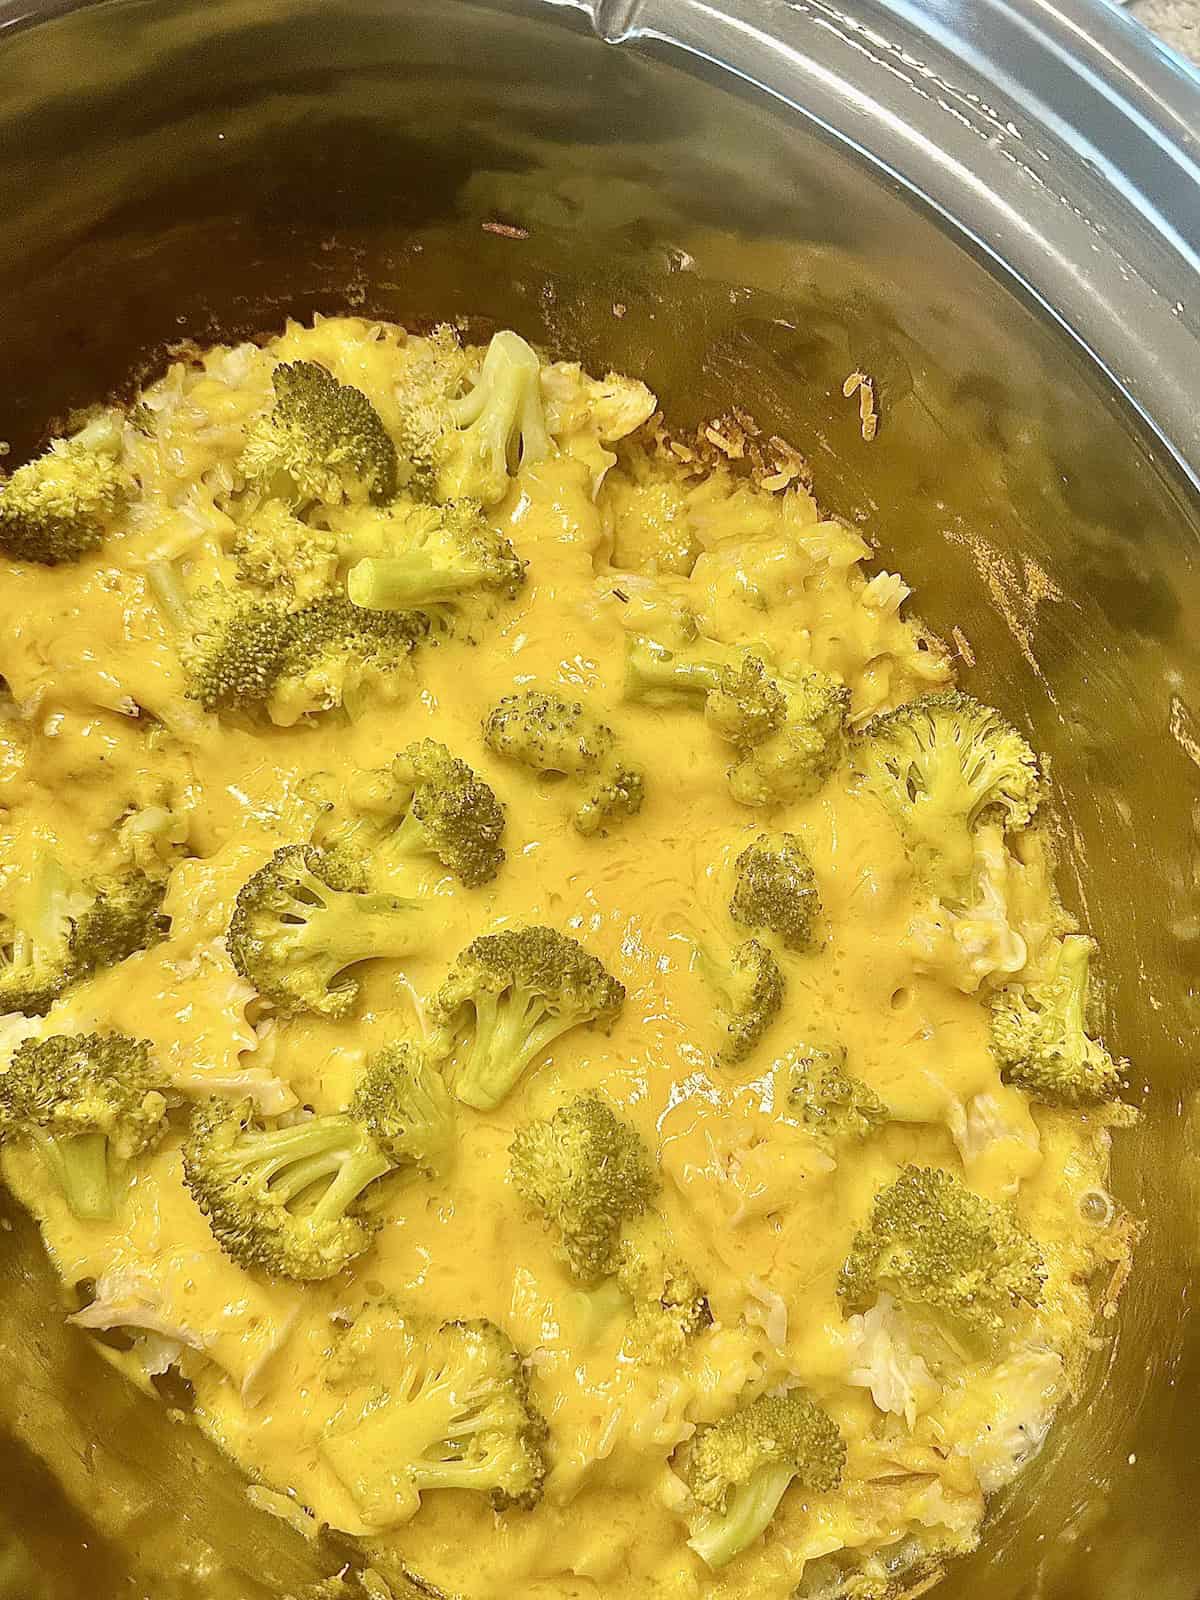 melted cheese, and broccoli in a crockpot